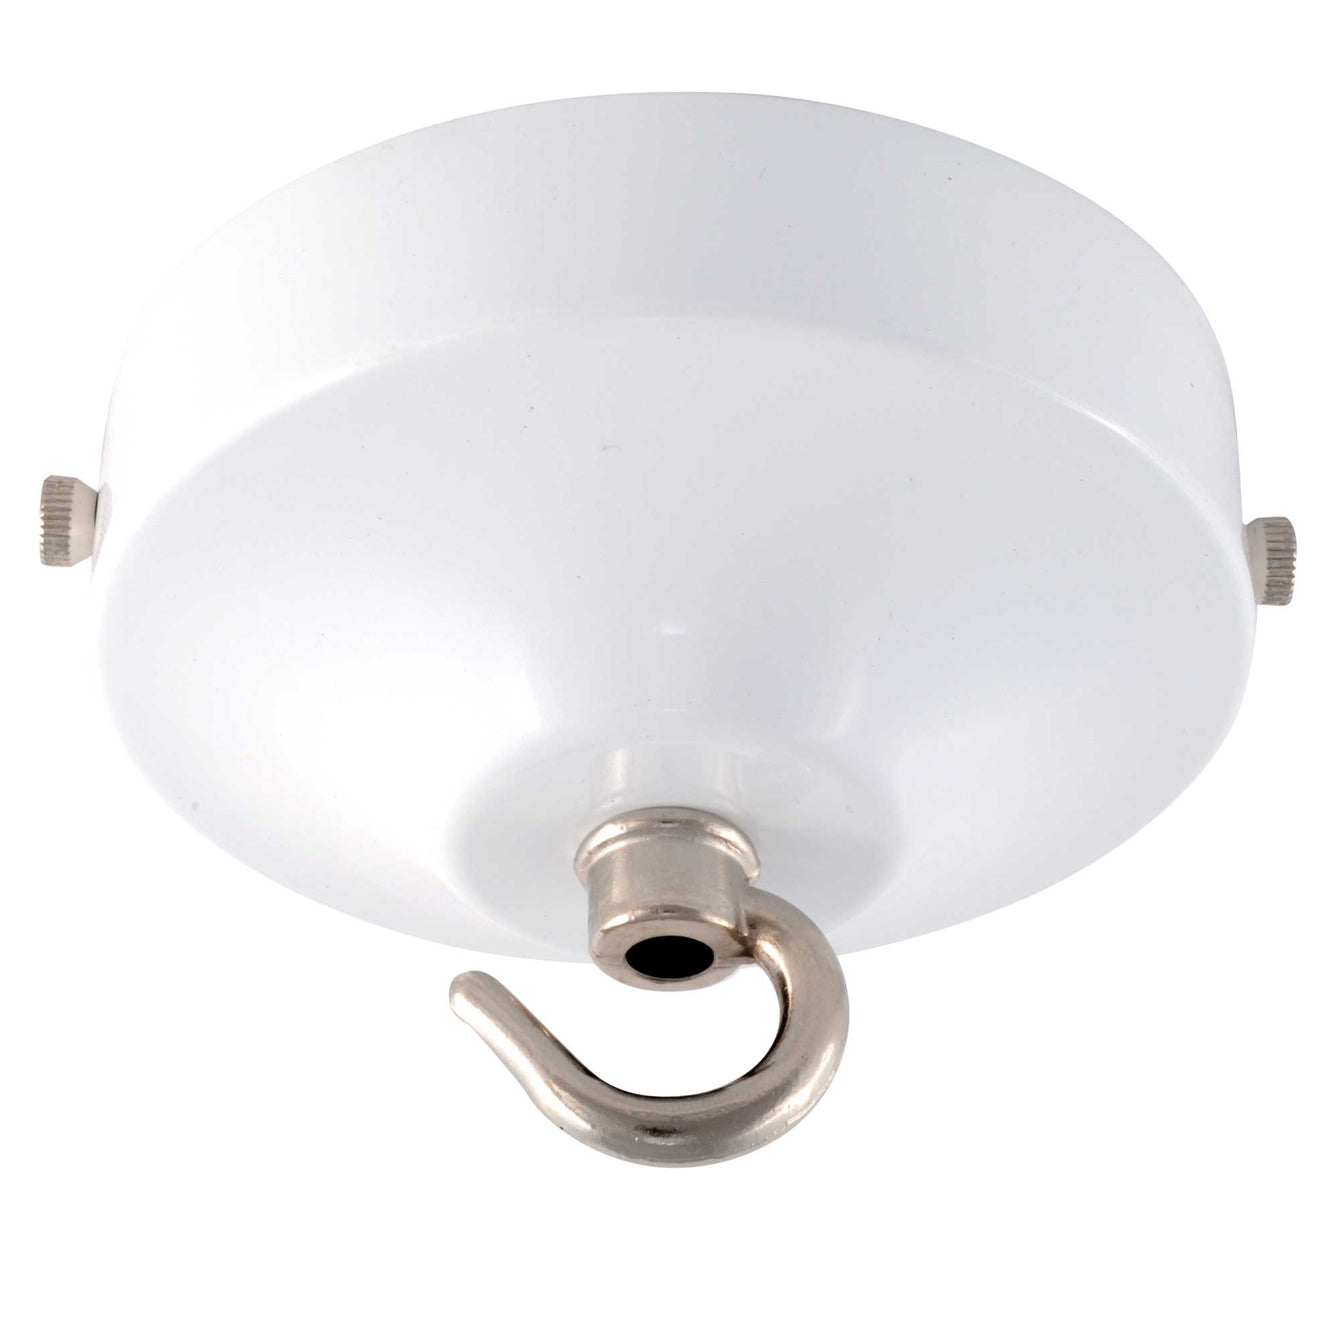 ElekTek 100mm Diameter Convex Ceiling Rose with Strap Bracket and Hook Metallic and Powder Coated Finishes Brilliant White